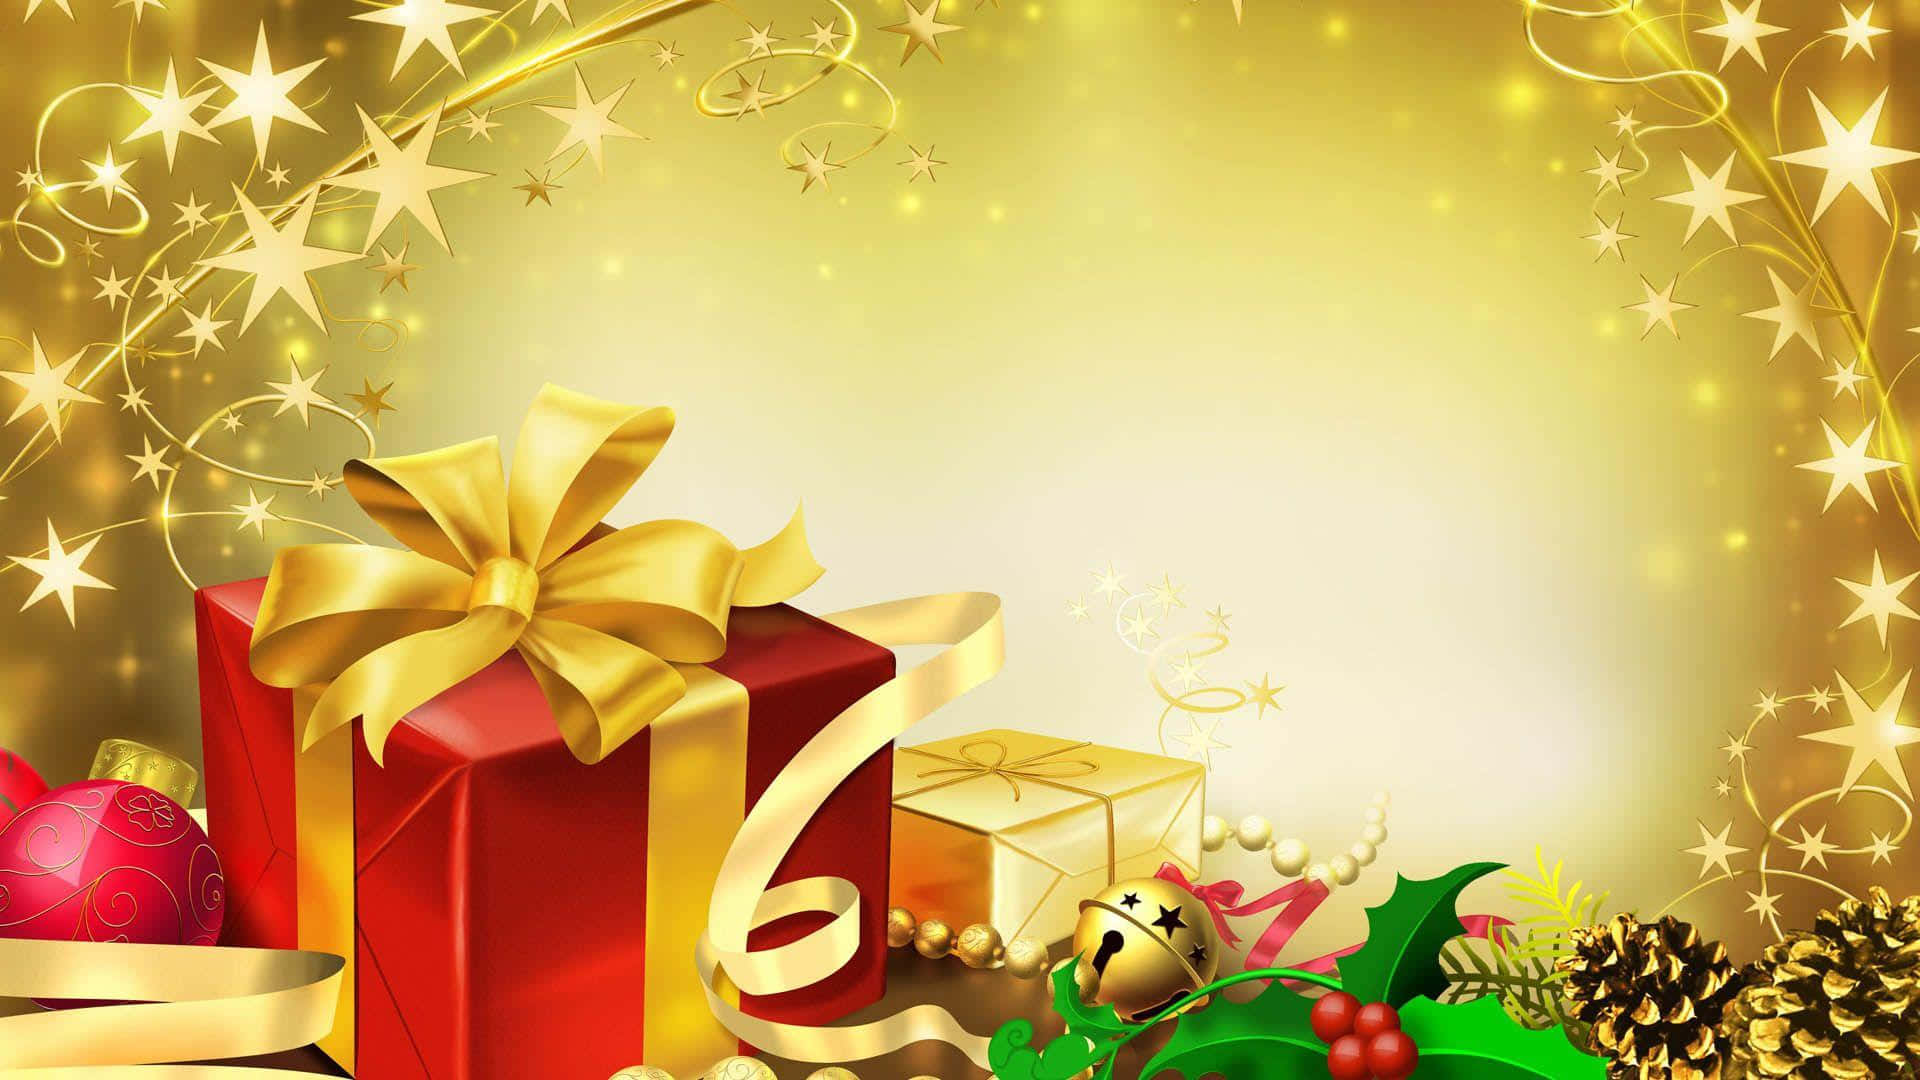 Christmas Background With A Golden Gift Box And Decorations